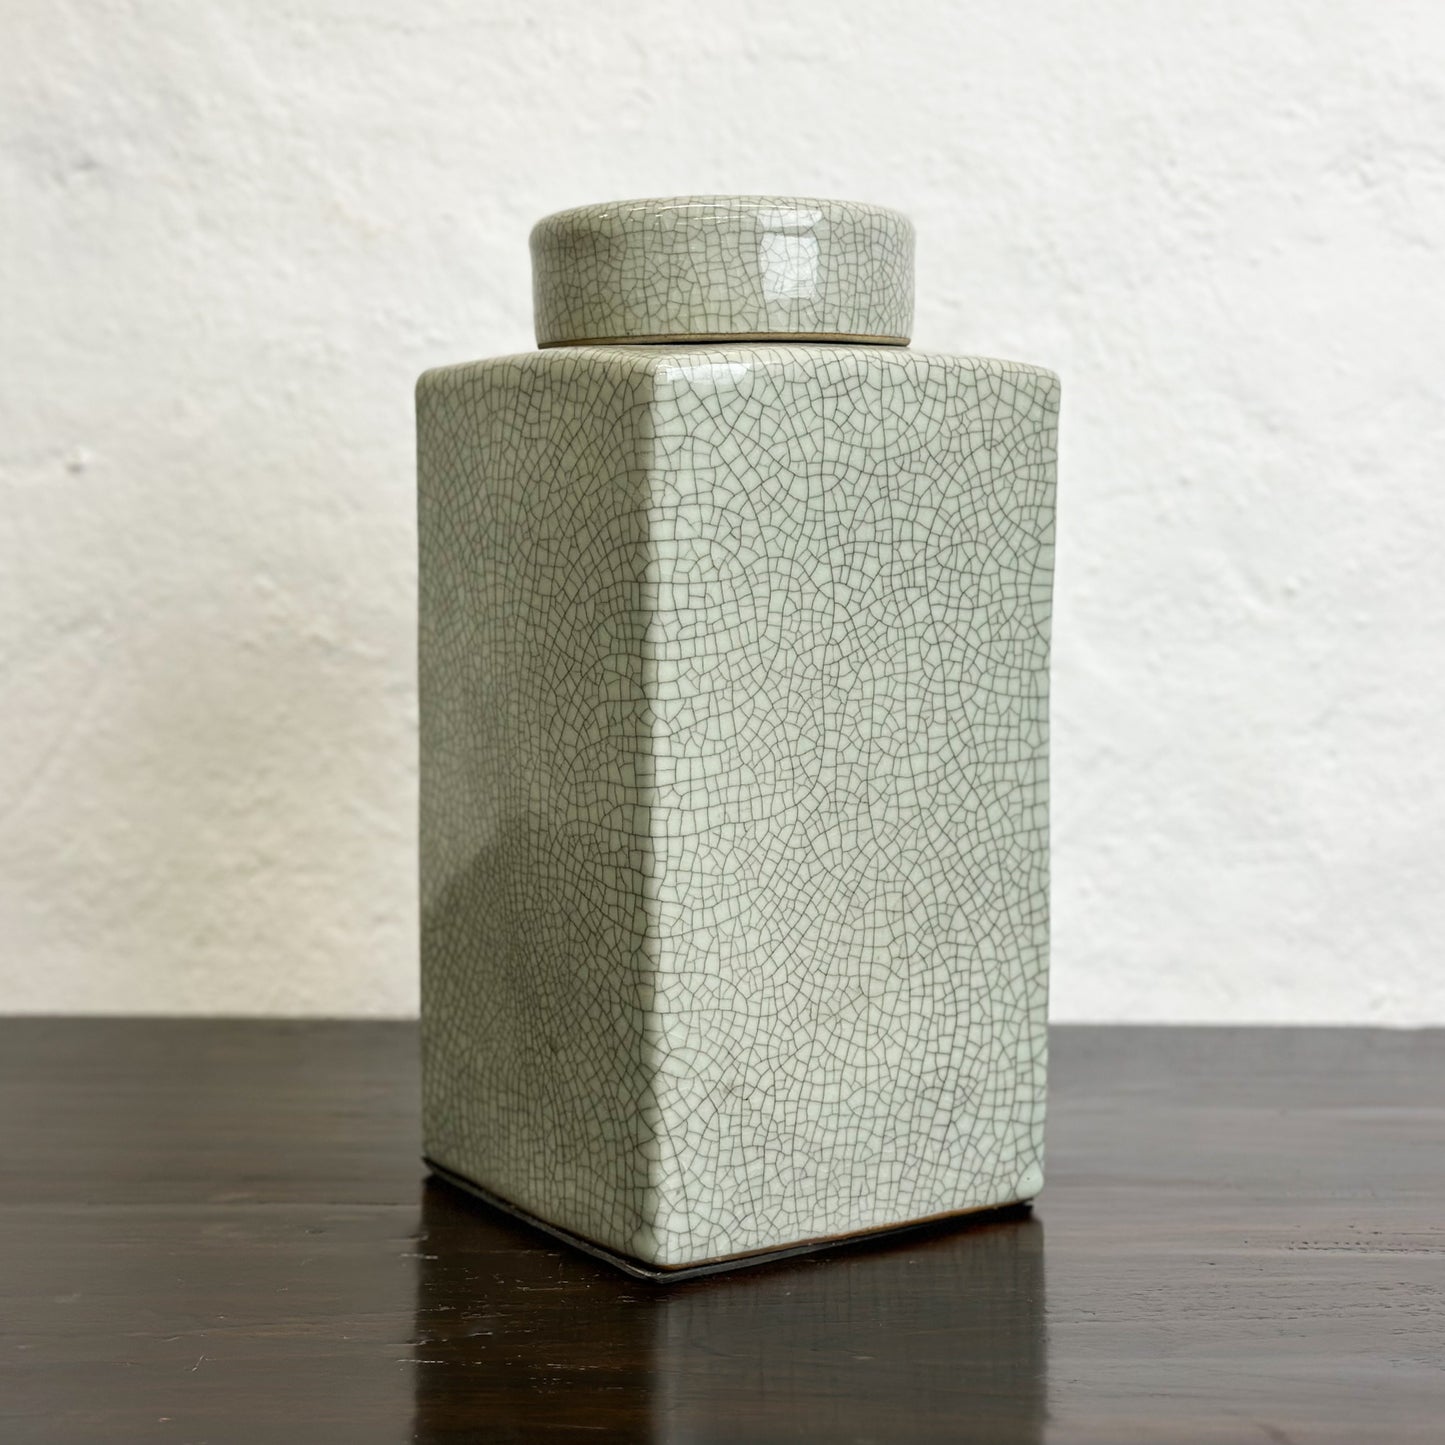 Chinese-Crackled-Light-Celadon-Square-Container-with-Lid-Porcelain2